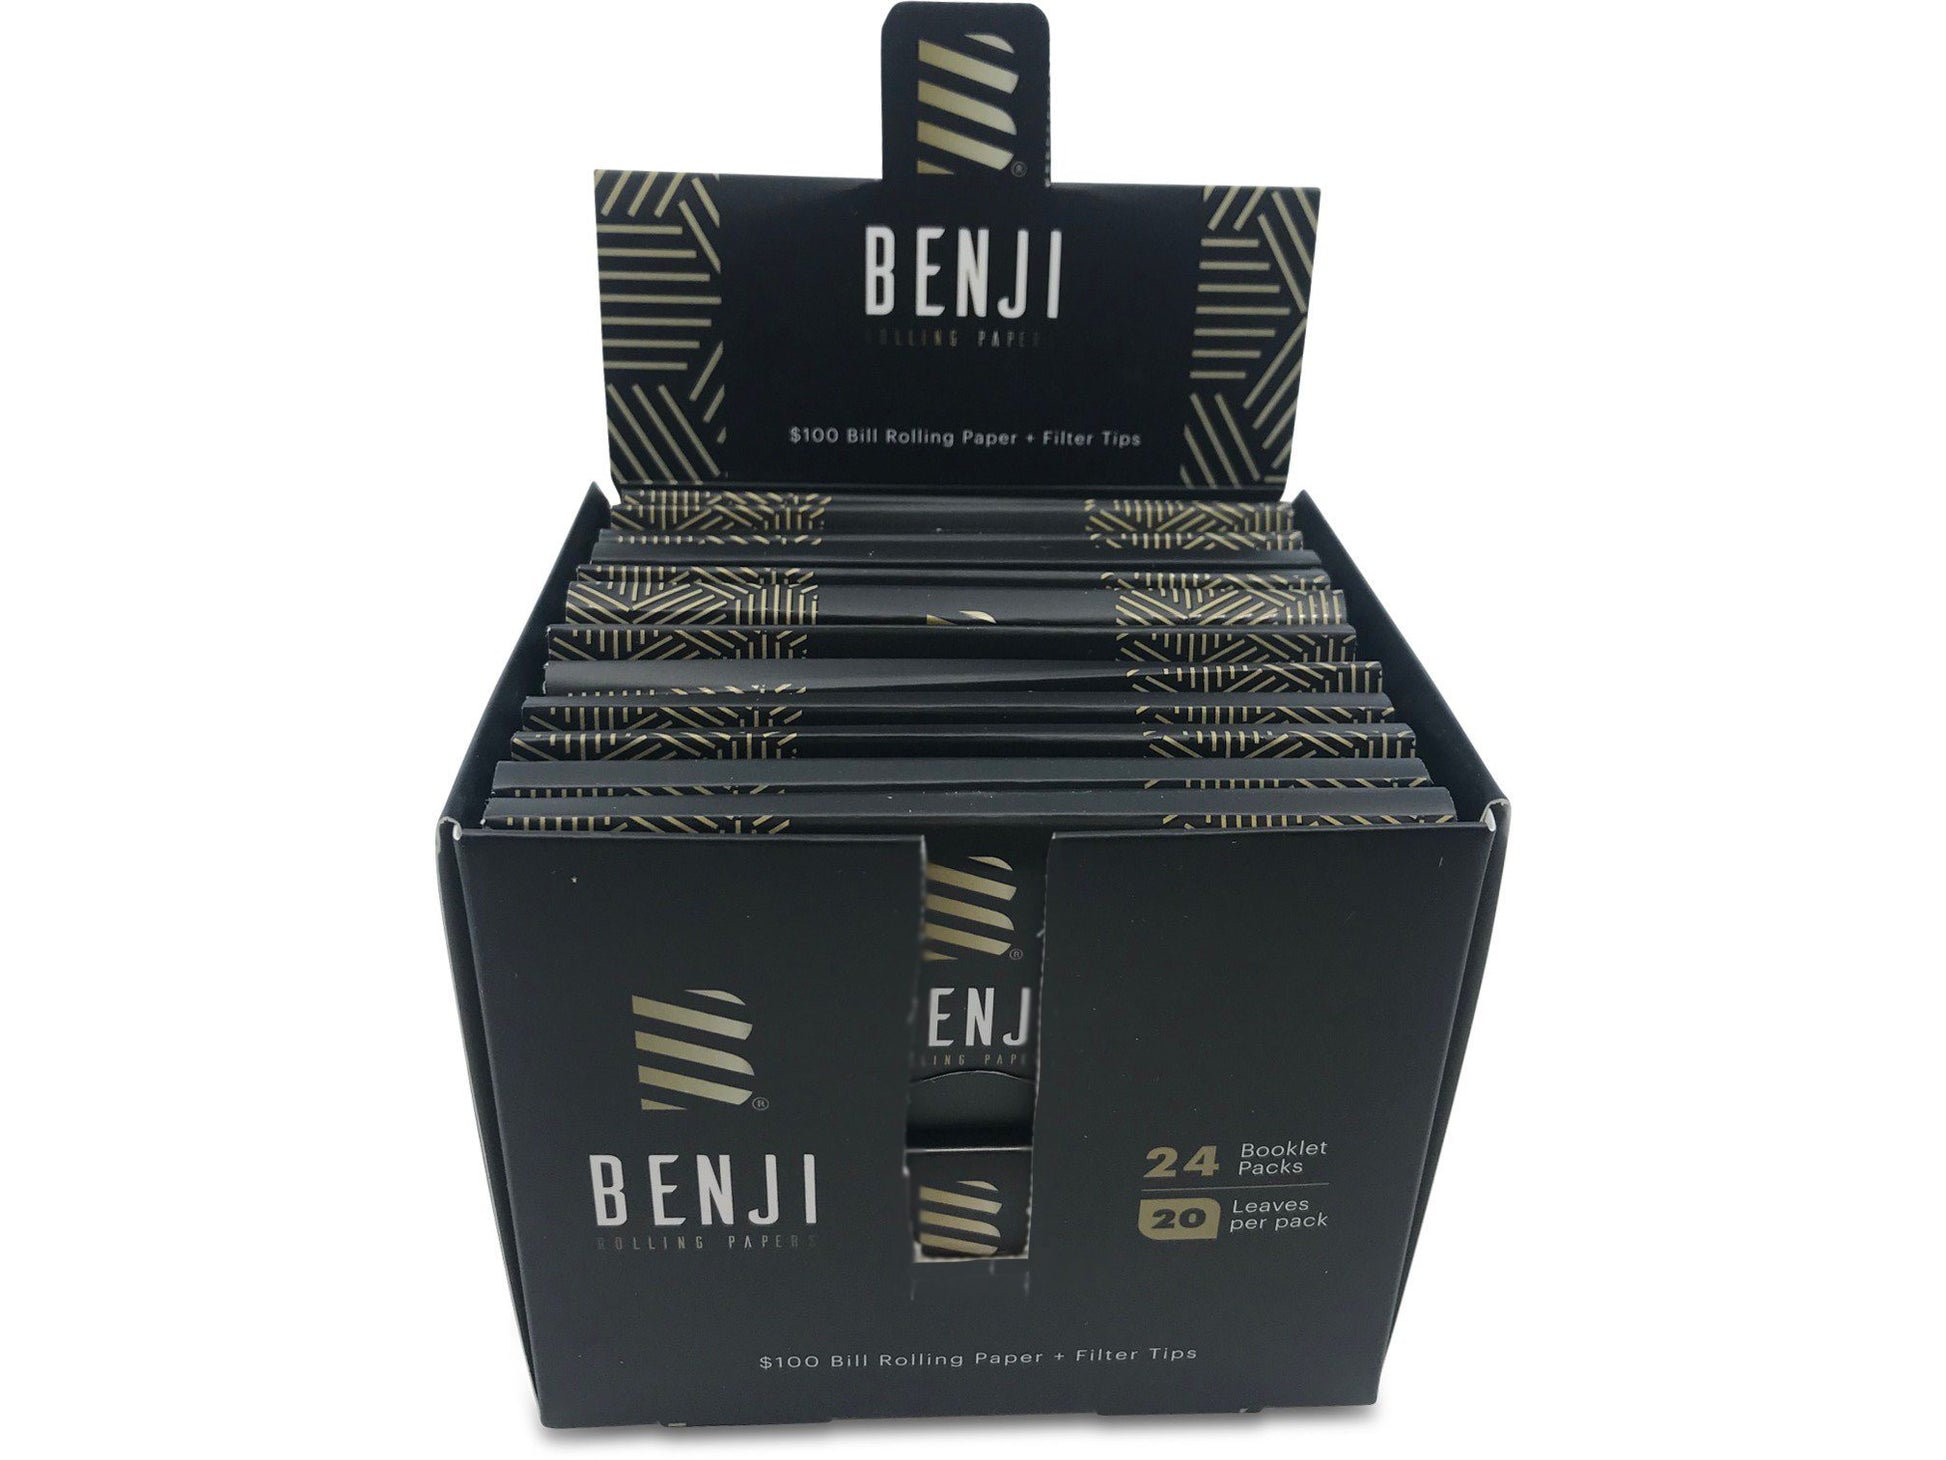 Benji - Rolling Paper Booklets (Box of 24) Flower Power Packages 